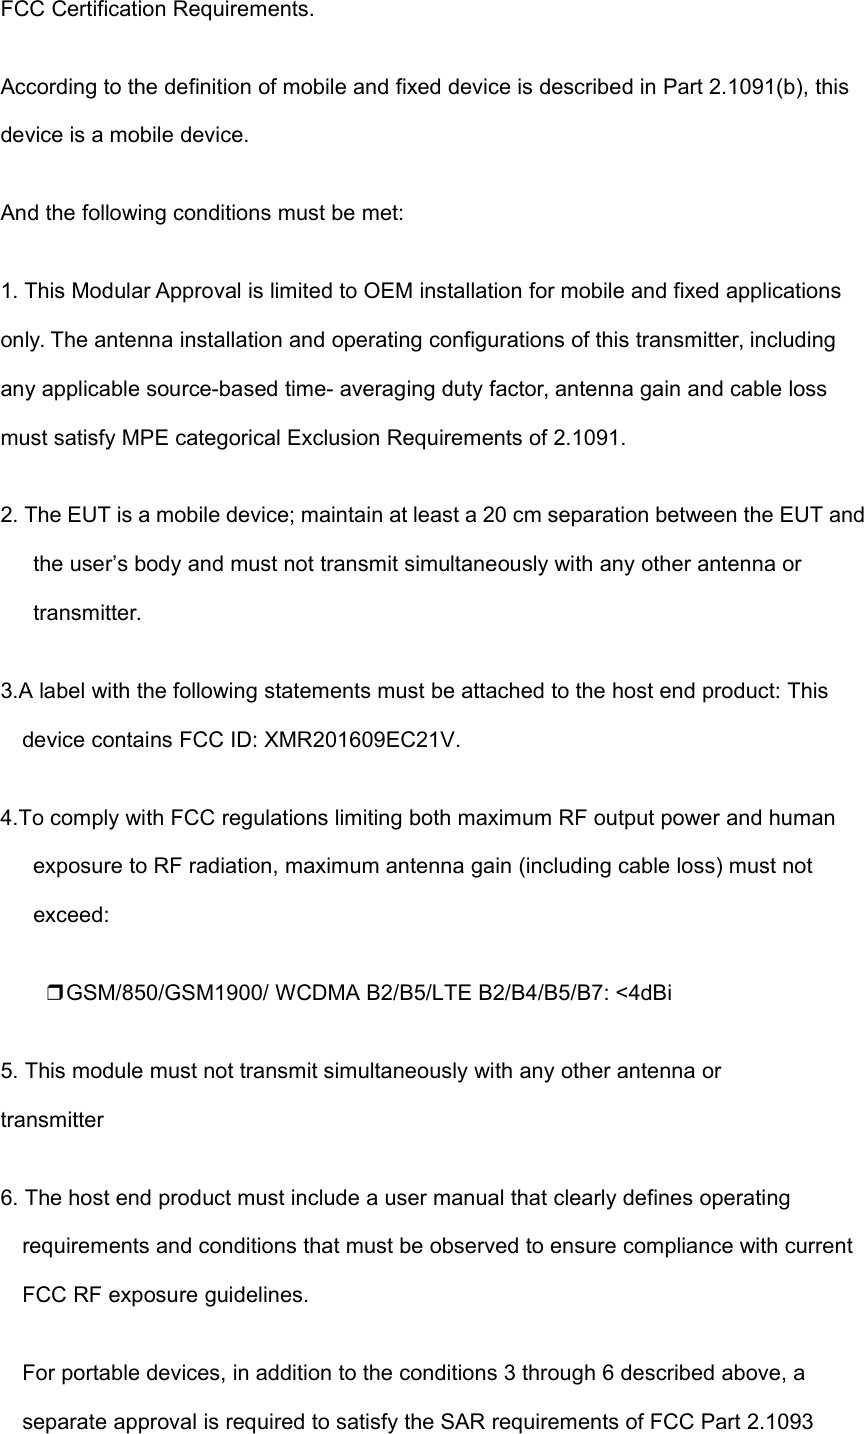 FCC Certification Requirements.According to the definition of mobile and fixed device is described in Part 2.1091(b), thisdevice is a mobile device.And the following conditions must be met:1. This Modular Approval is limited to OEM installation for mobile and fixed applicationsonly. The antenna installation and operating configurations of this transmitter, includingany applicable source-based time- averaging duty factor, antenna gain and cable lossmust satisfy MPE categorical Exclusion Requirements of 2.1091.2. The EUT is a mobile device; maintain at least a 20 cm separation between the EUT andthe user’s body and must not transmit simultaneously with any other antenna ortransmitter.3.A label with the following statements must be attached to the host end product: Thisdevice contains FCC ID: XMR201609EC21V.4.To comply with FCC regulations limiting both maximum RF output power and humanexposure to RF radiation, maximum antenna gain (including cable loss) must notexceed:❒GSM/850/GSM1900/ WCDMA B2/B5/LTE B2/B4/B5/B7: &lt;4dBi5. This module must not transmit simultaneously with any other antenna ortransmitter6. The host end product must include a user manual that clearly defines operatingrequirements and conditions that must be observed to ensure compliance with currentFCC RF exposure guidelines.For portable devices, in addition to the conditions 3 through 6 described above, aseparate approval is required to satisfy the SAR requirements of FCC Part 2.1093